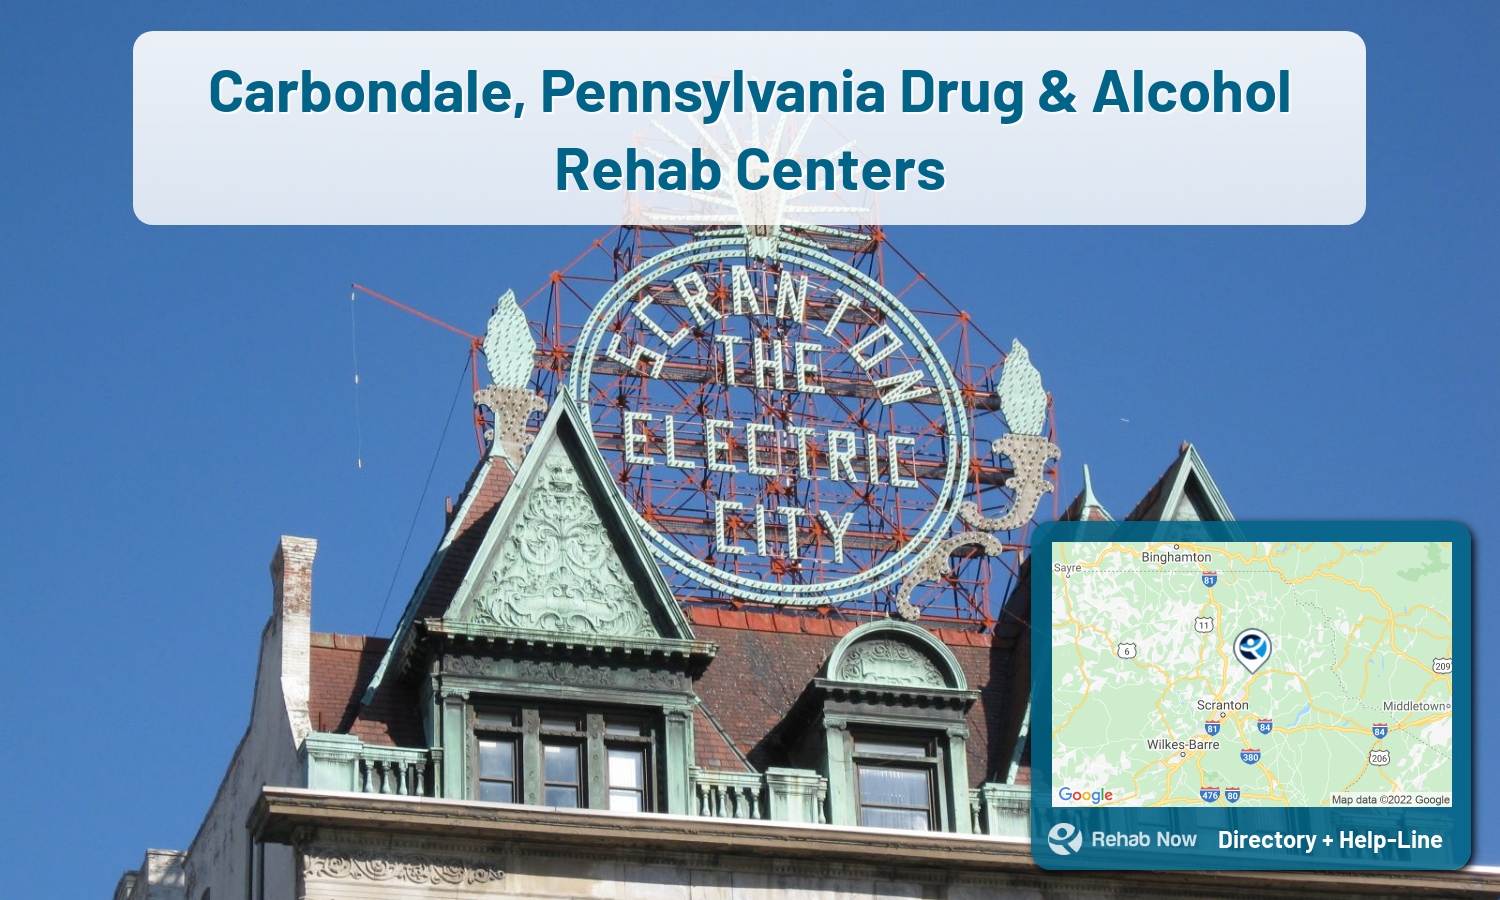 Find drug rehab and alcohol treatment services in Carbondale. Our experts help you find a center in Carbondale, Pennsylvania